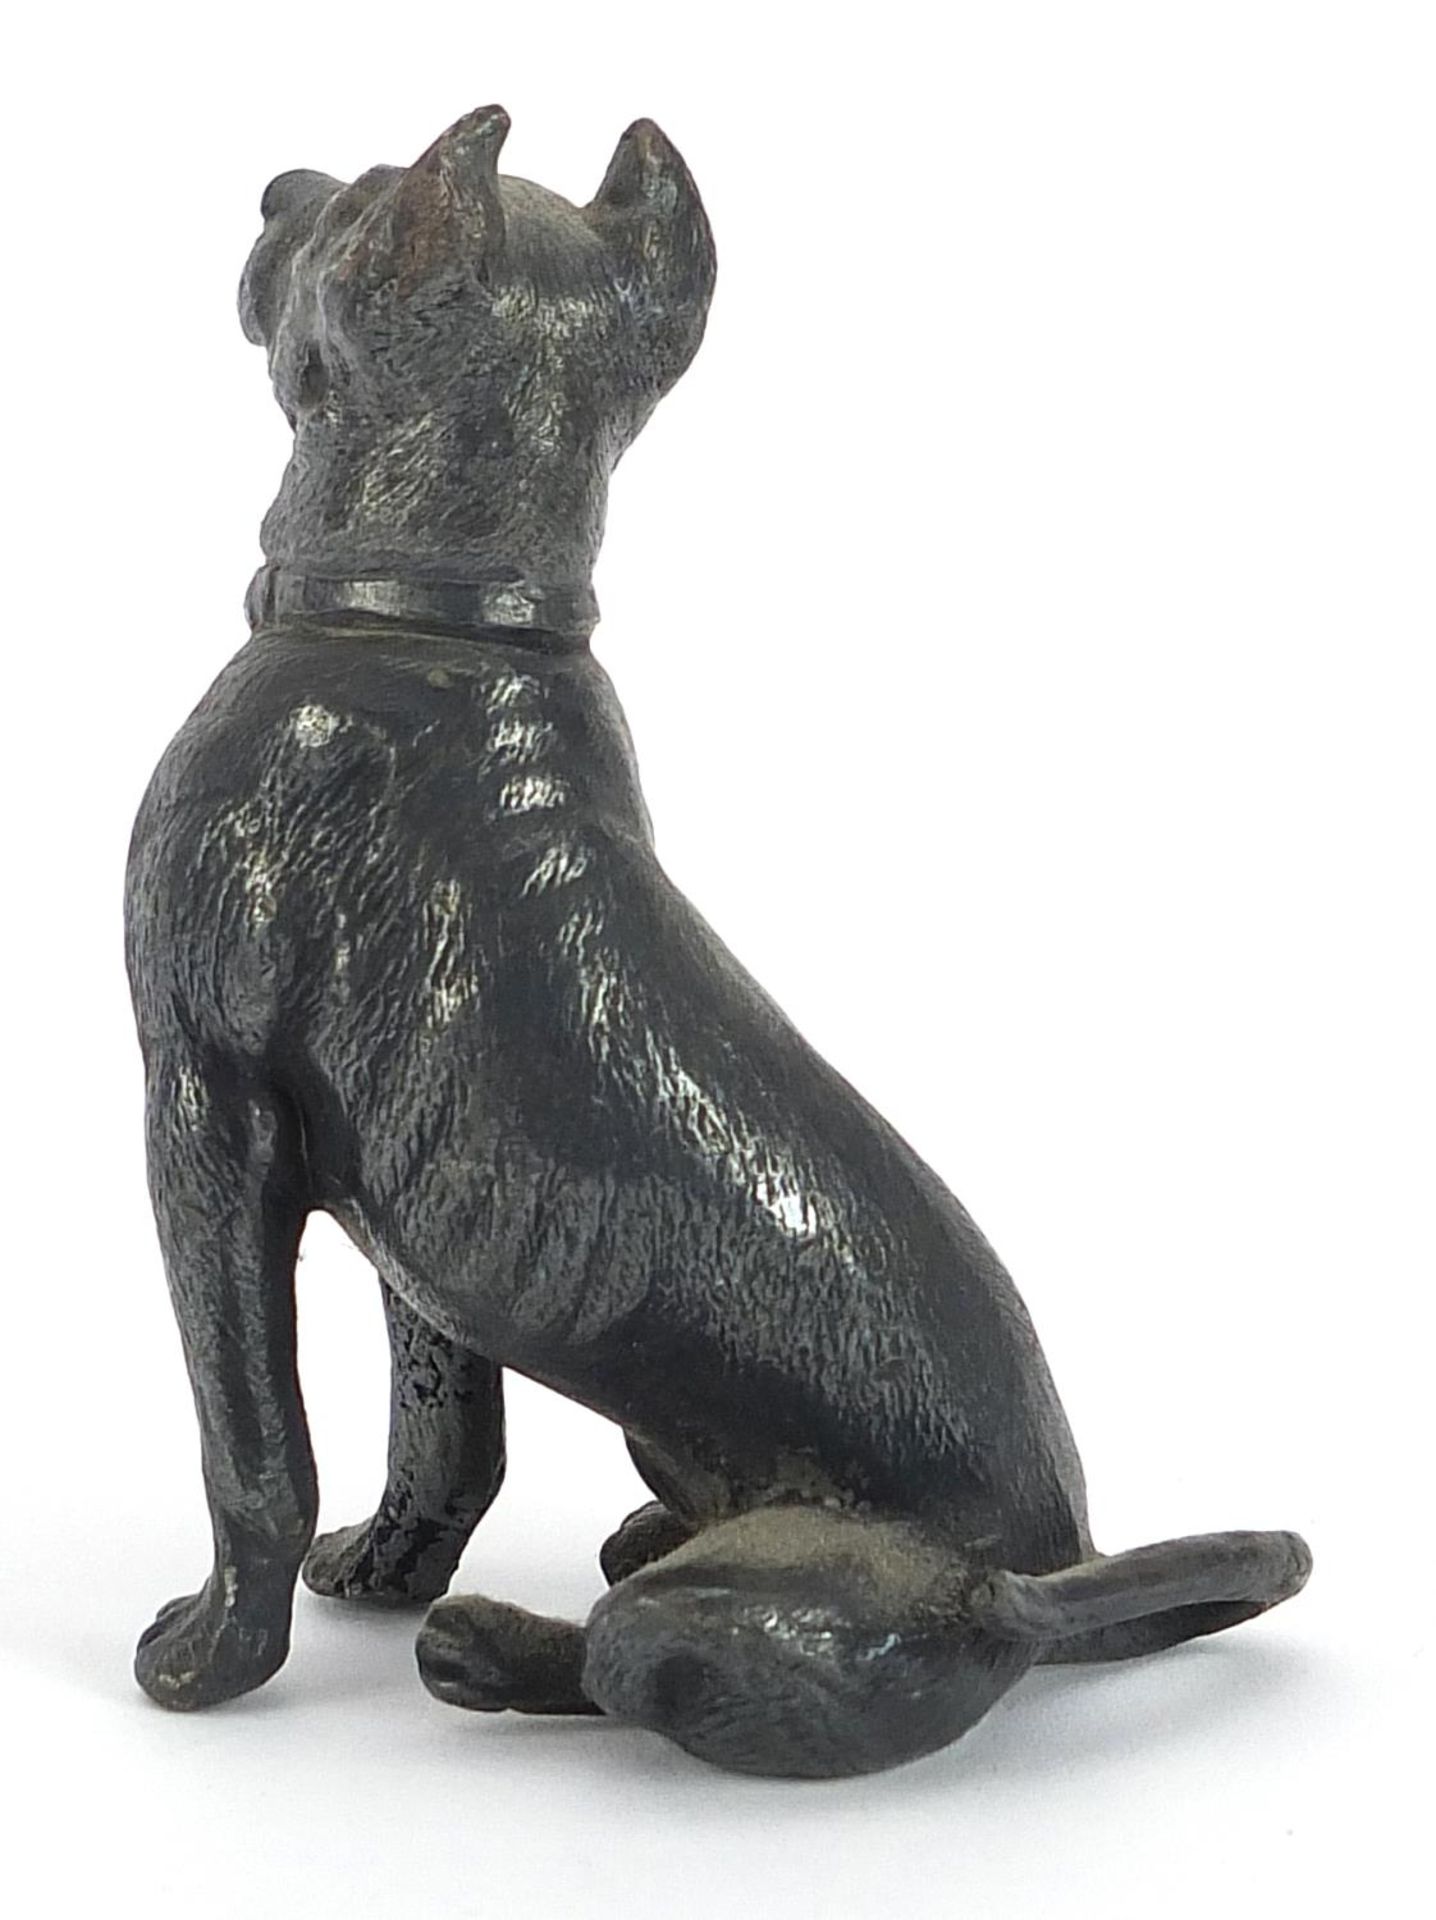 WMF, German silver plated model of a seated dog, 7.5cm high - Image 2 of 4